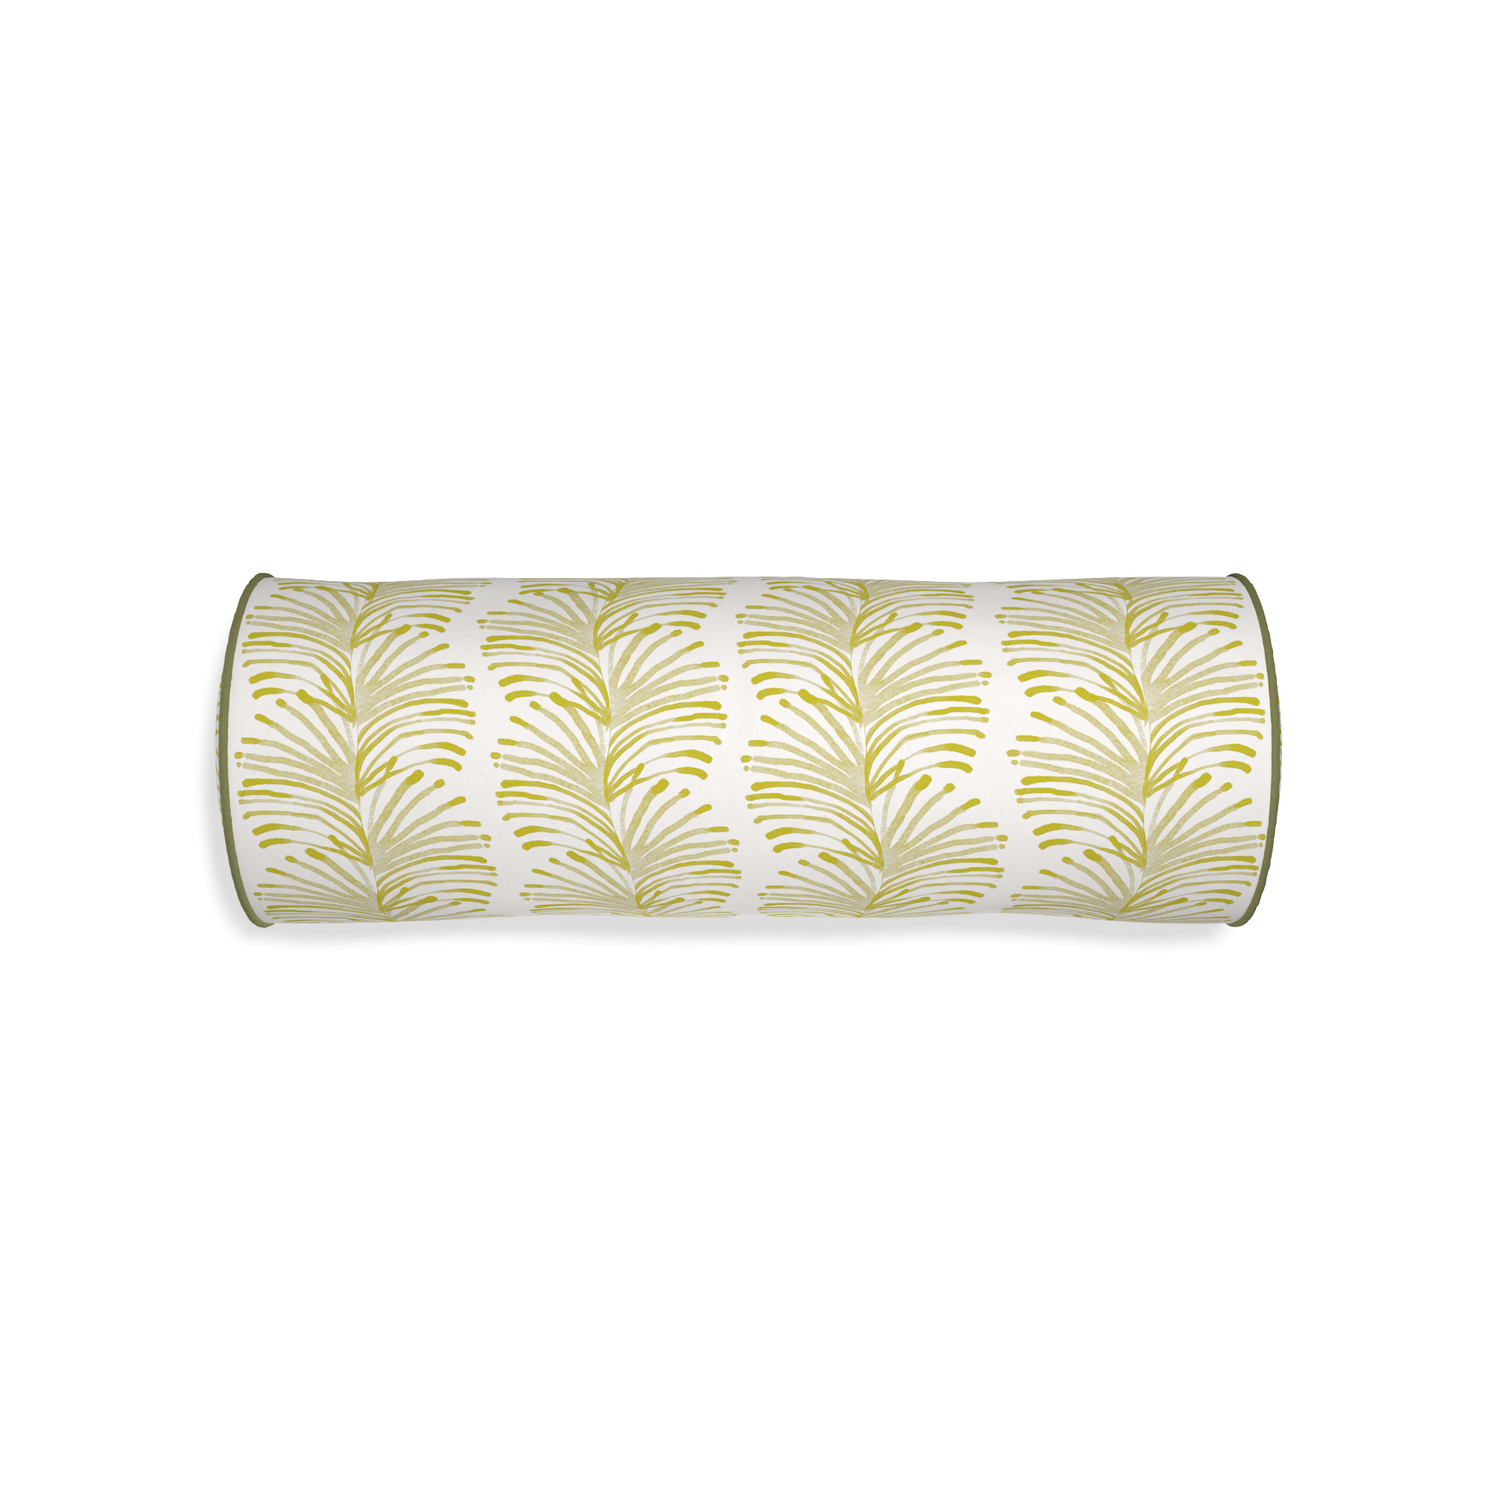 Bolster emma chartreuse custom pillow with moss piping on white background